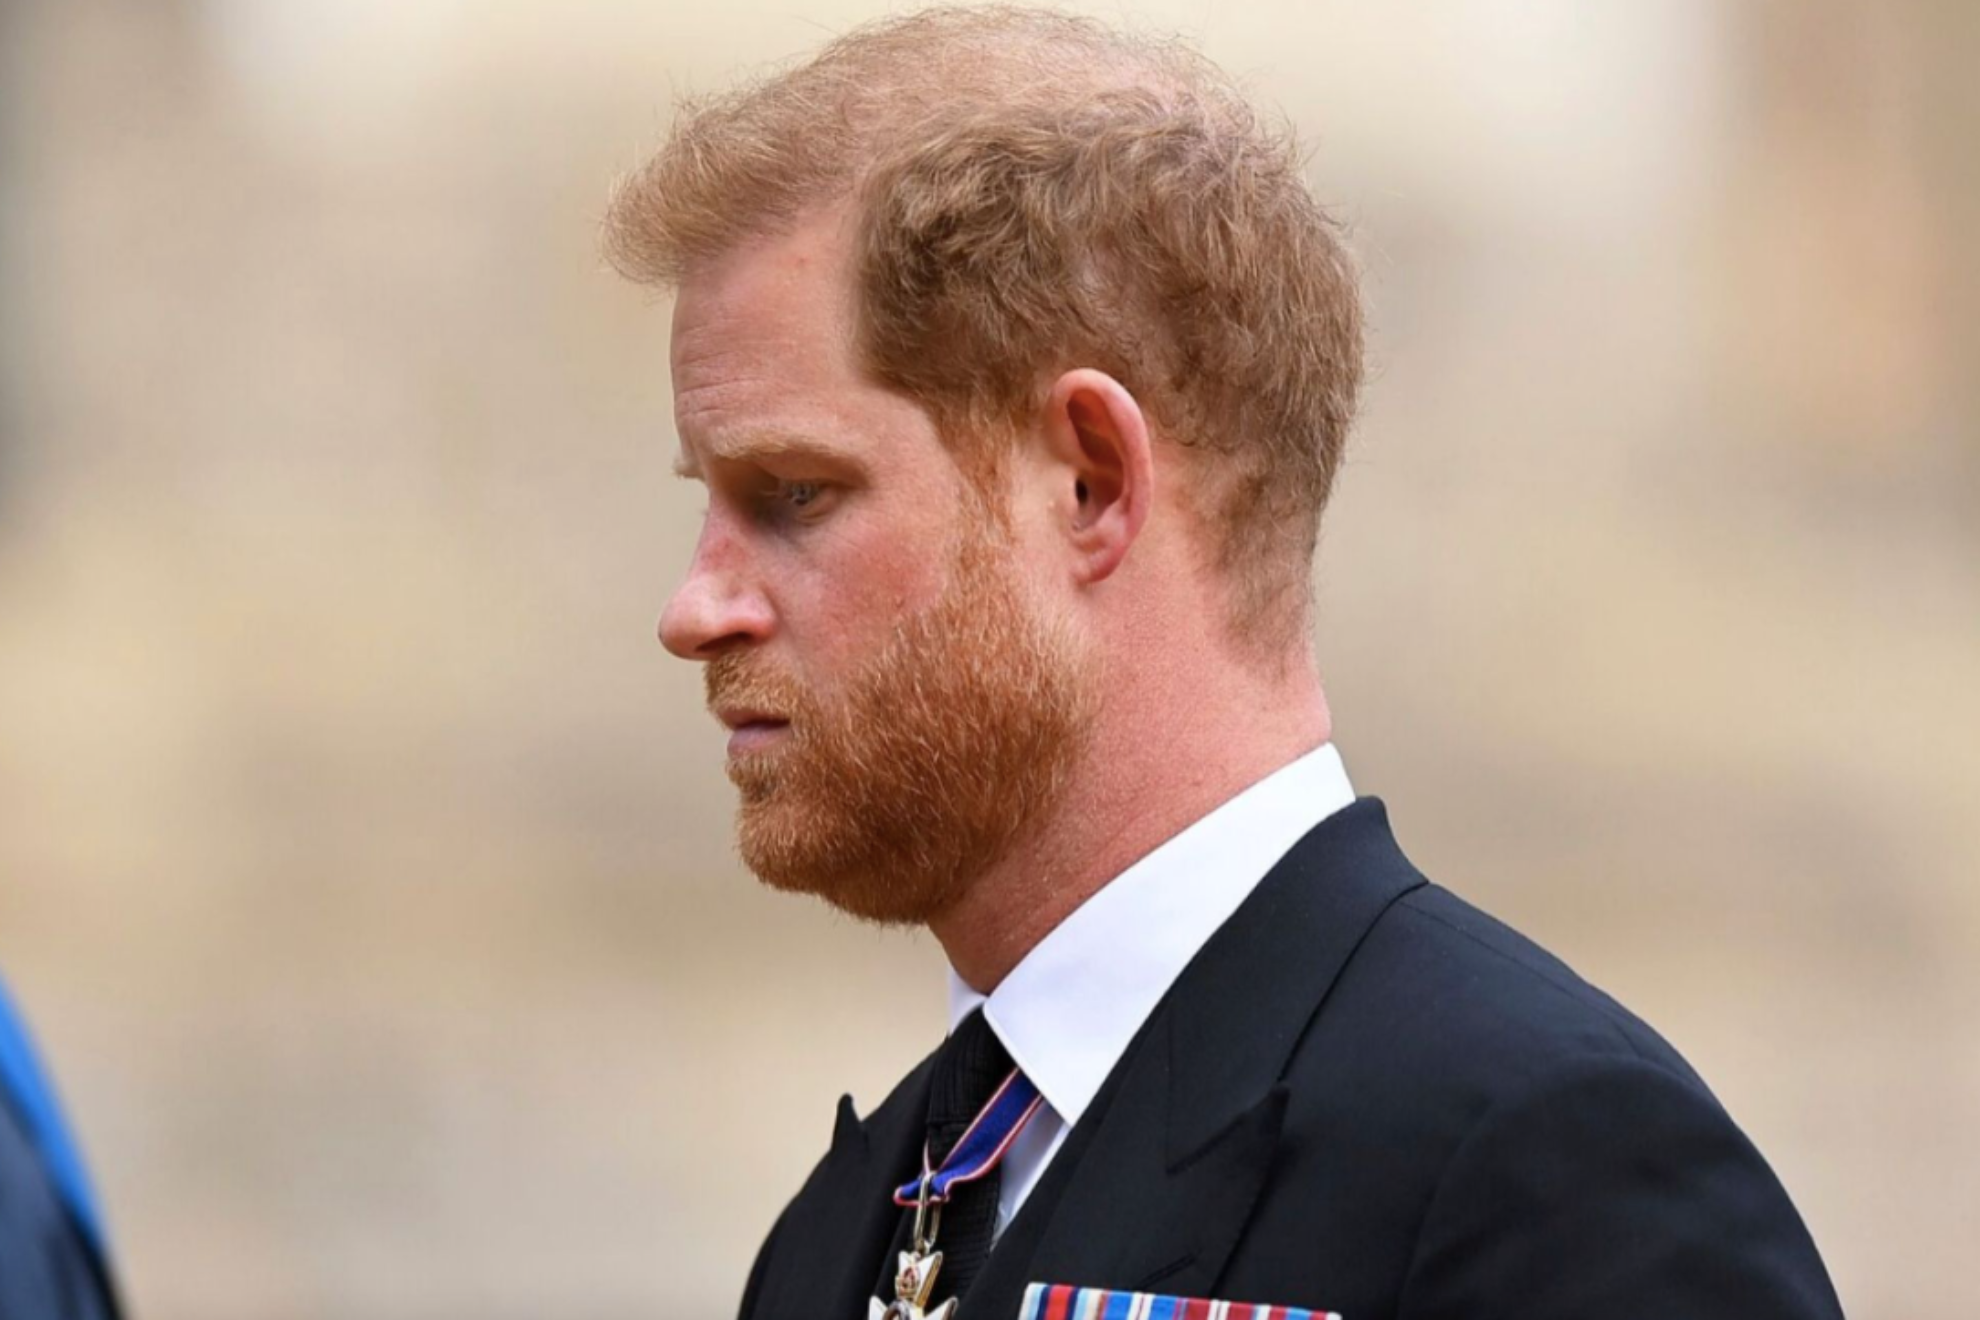 Prince Harry reveals where he would 'happily live'... and it's not the U.S.